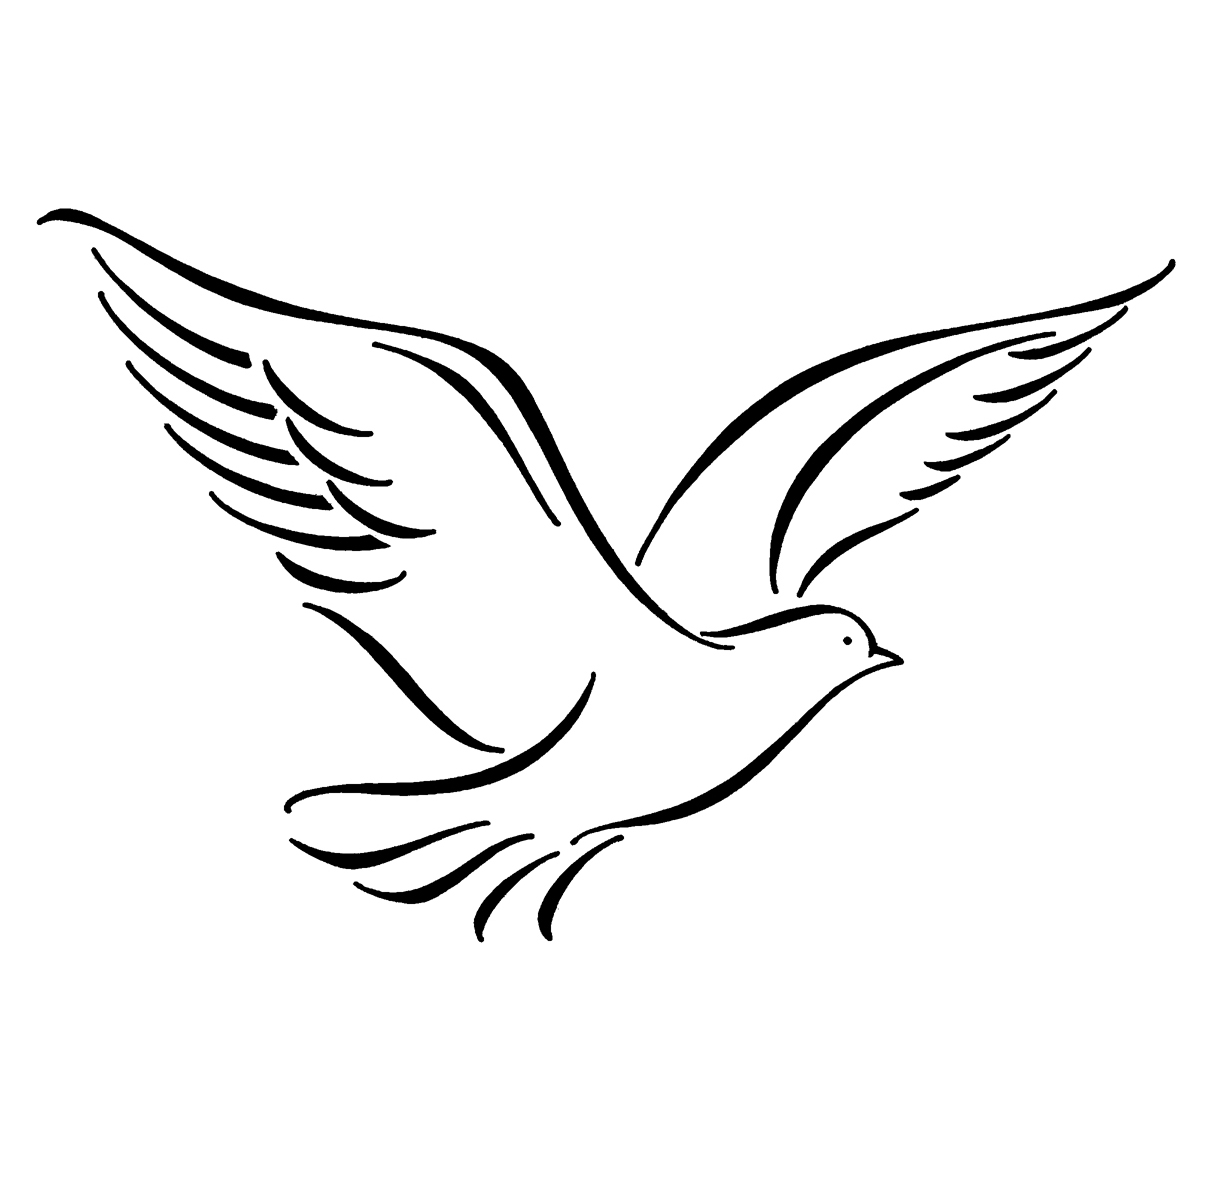 24 Dove Line Drawing Free Cliparts That You Can Download To You